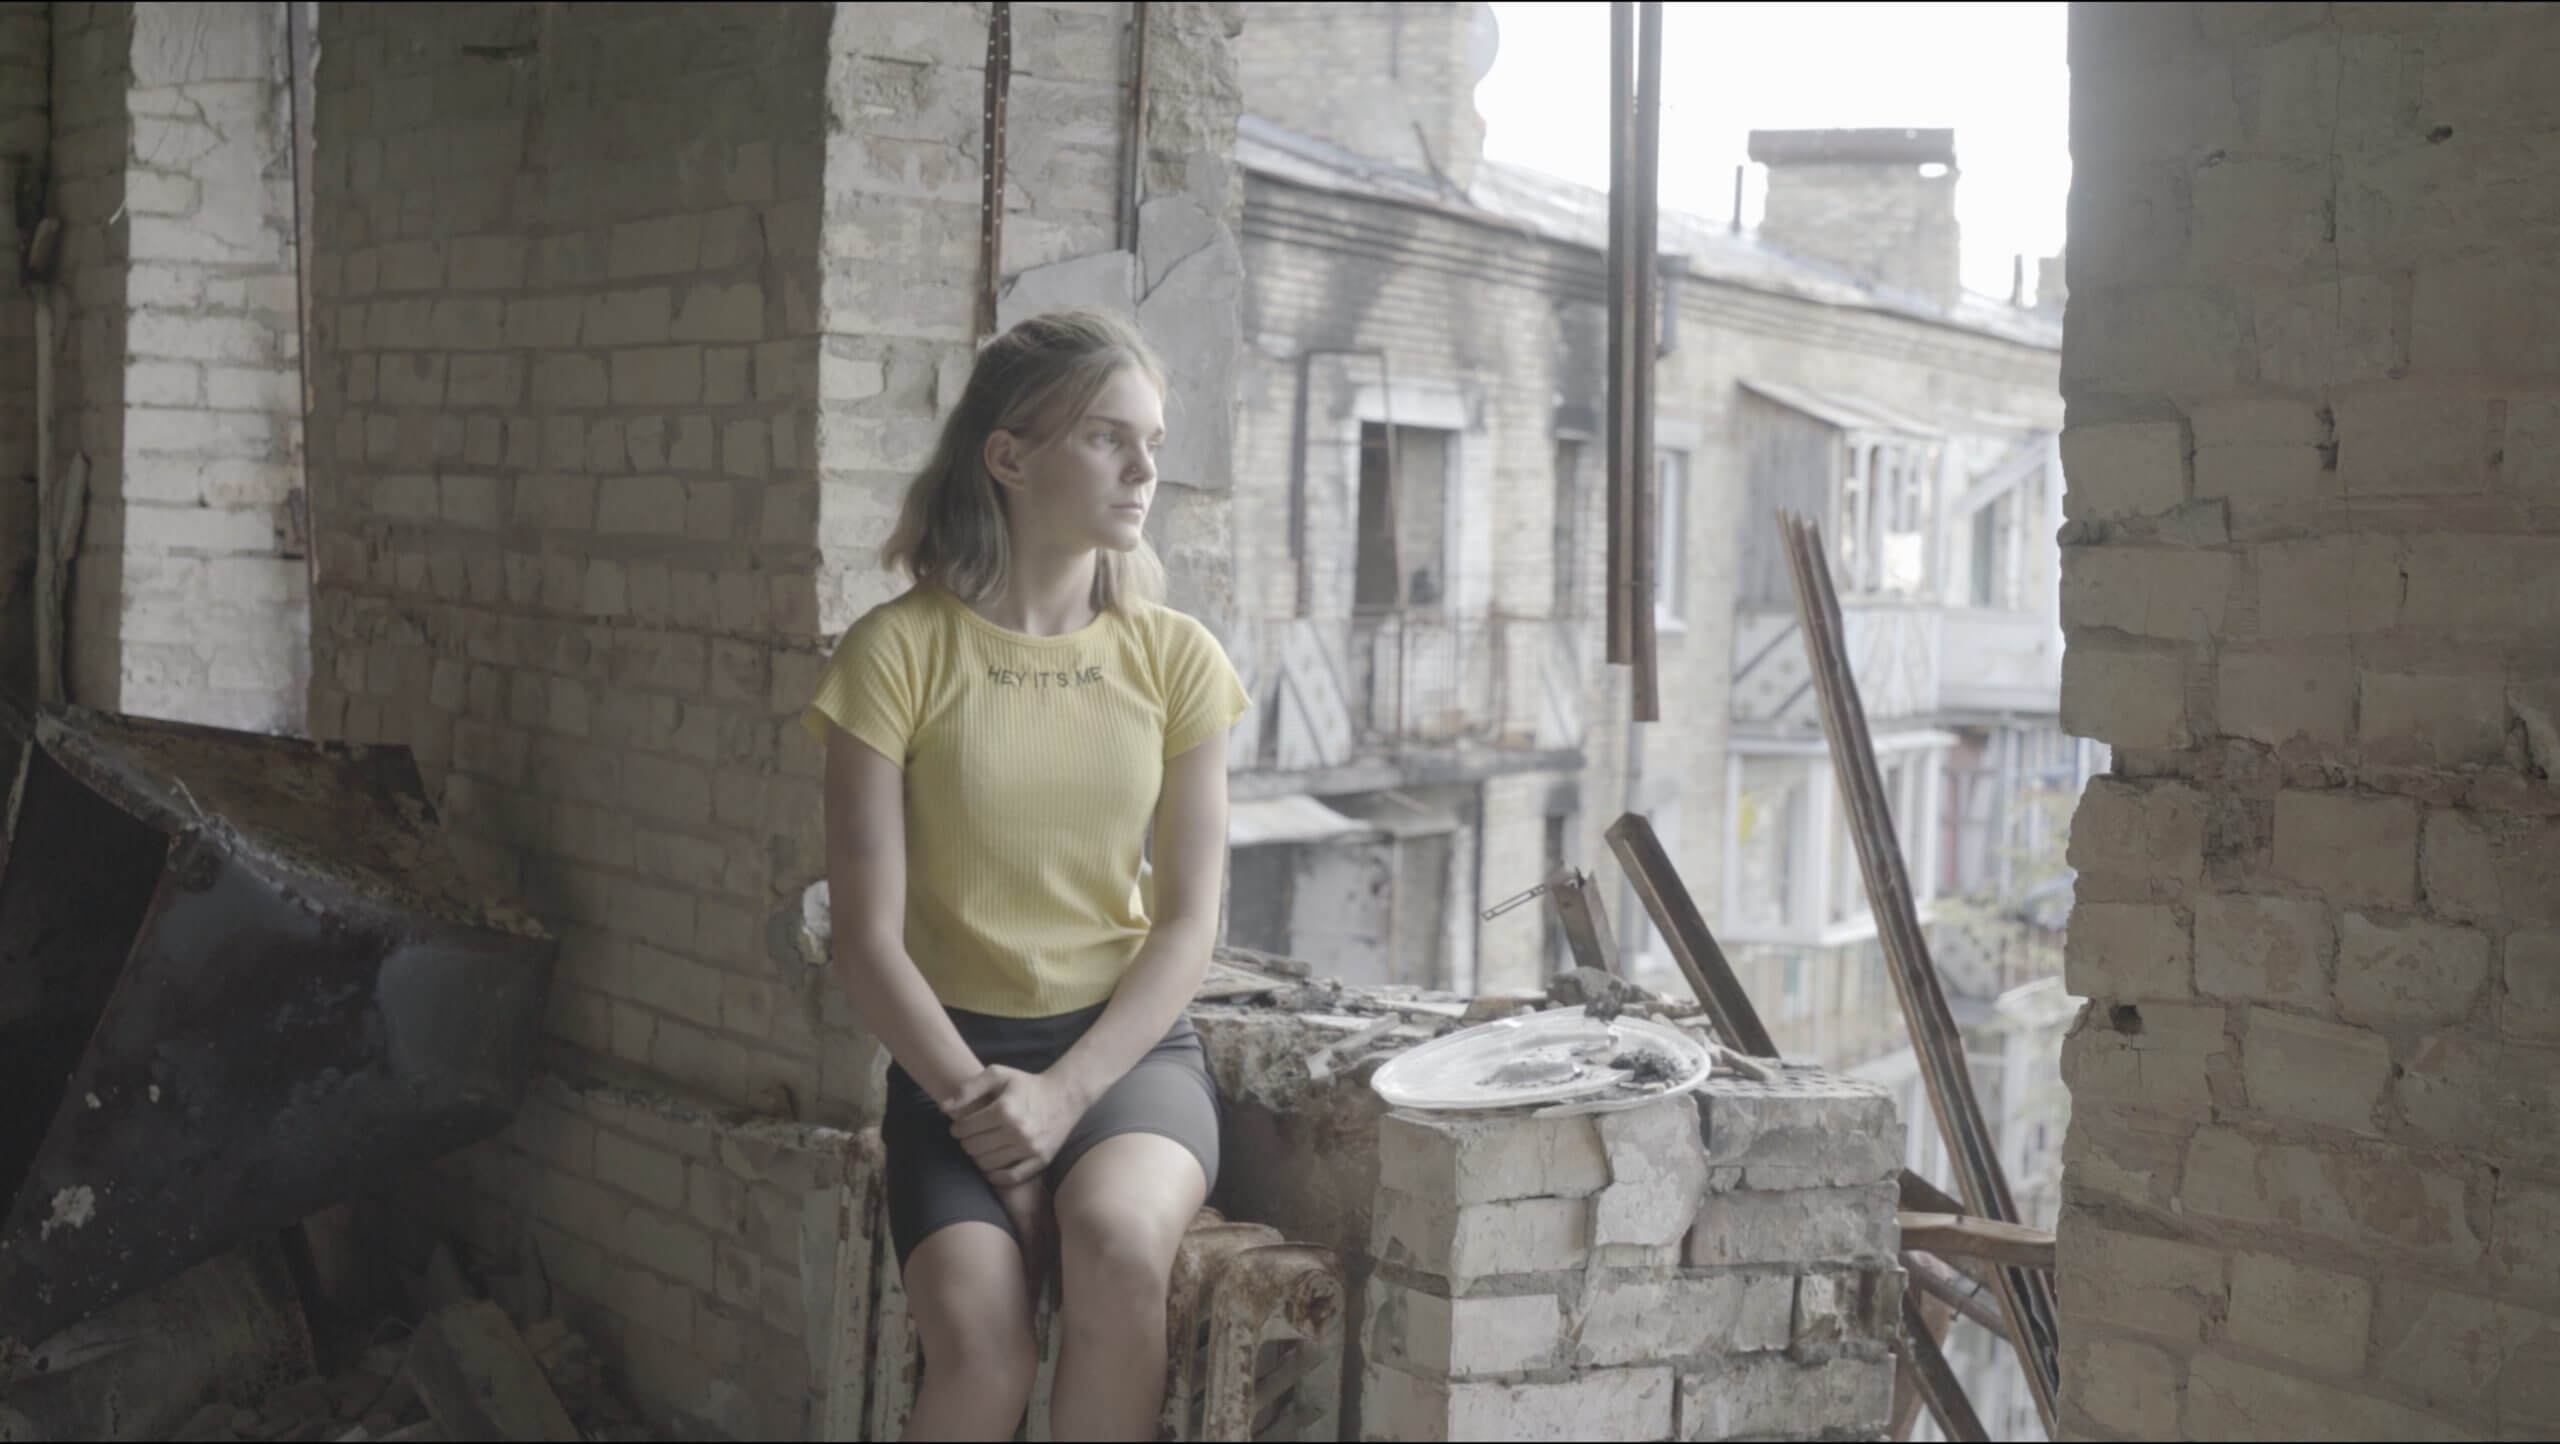 Production still of Intercepted. A young teenage girl in a yellow shirt is sitting in profile to the camera. She is on the edge of her former apartment's window. Surrounding her is rubble, the result of a recent bombing. In the background, the exterior of another bombed building can be seen.